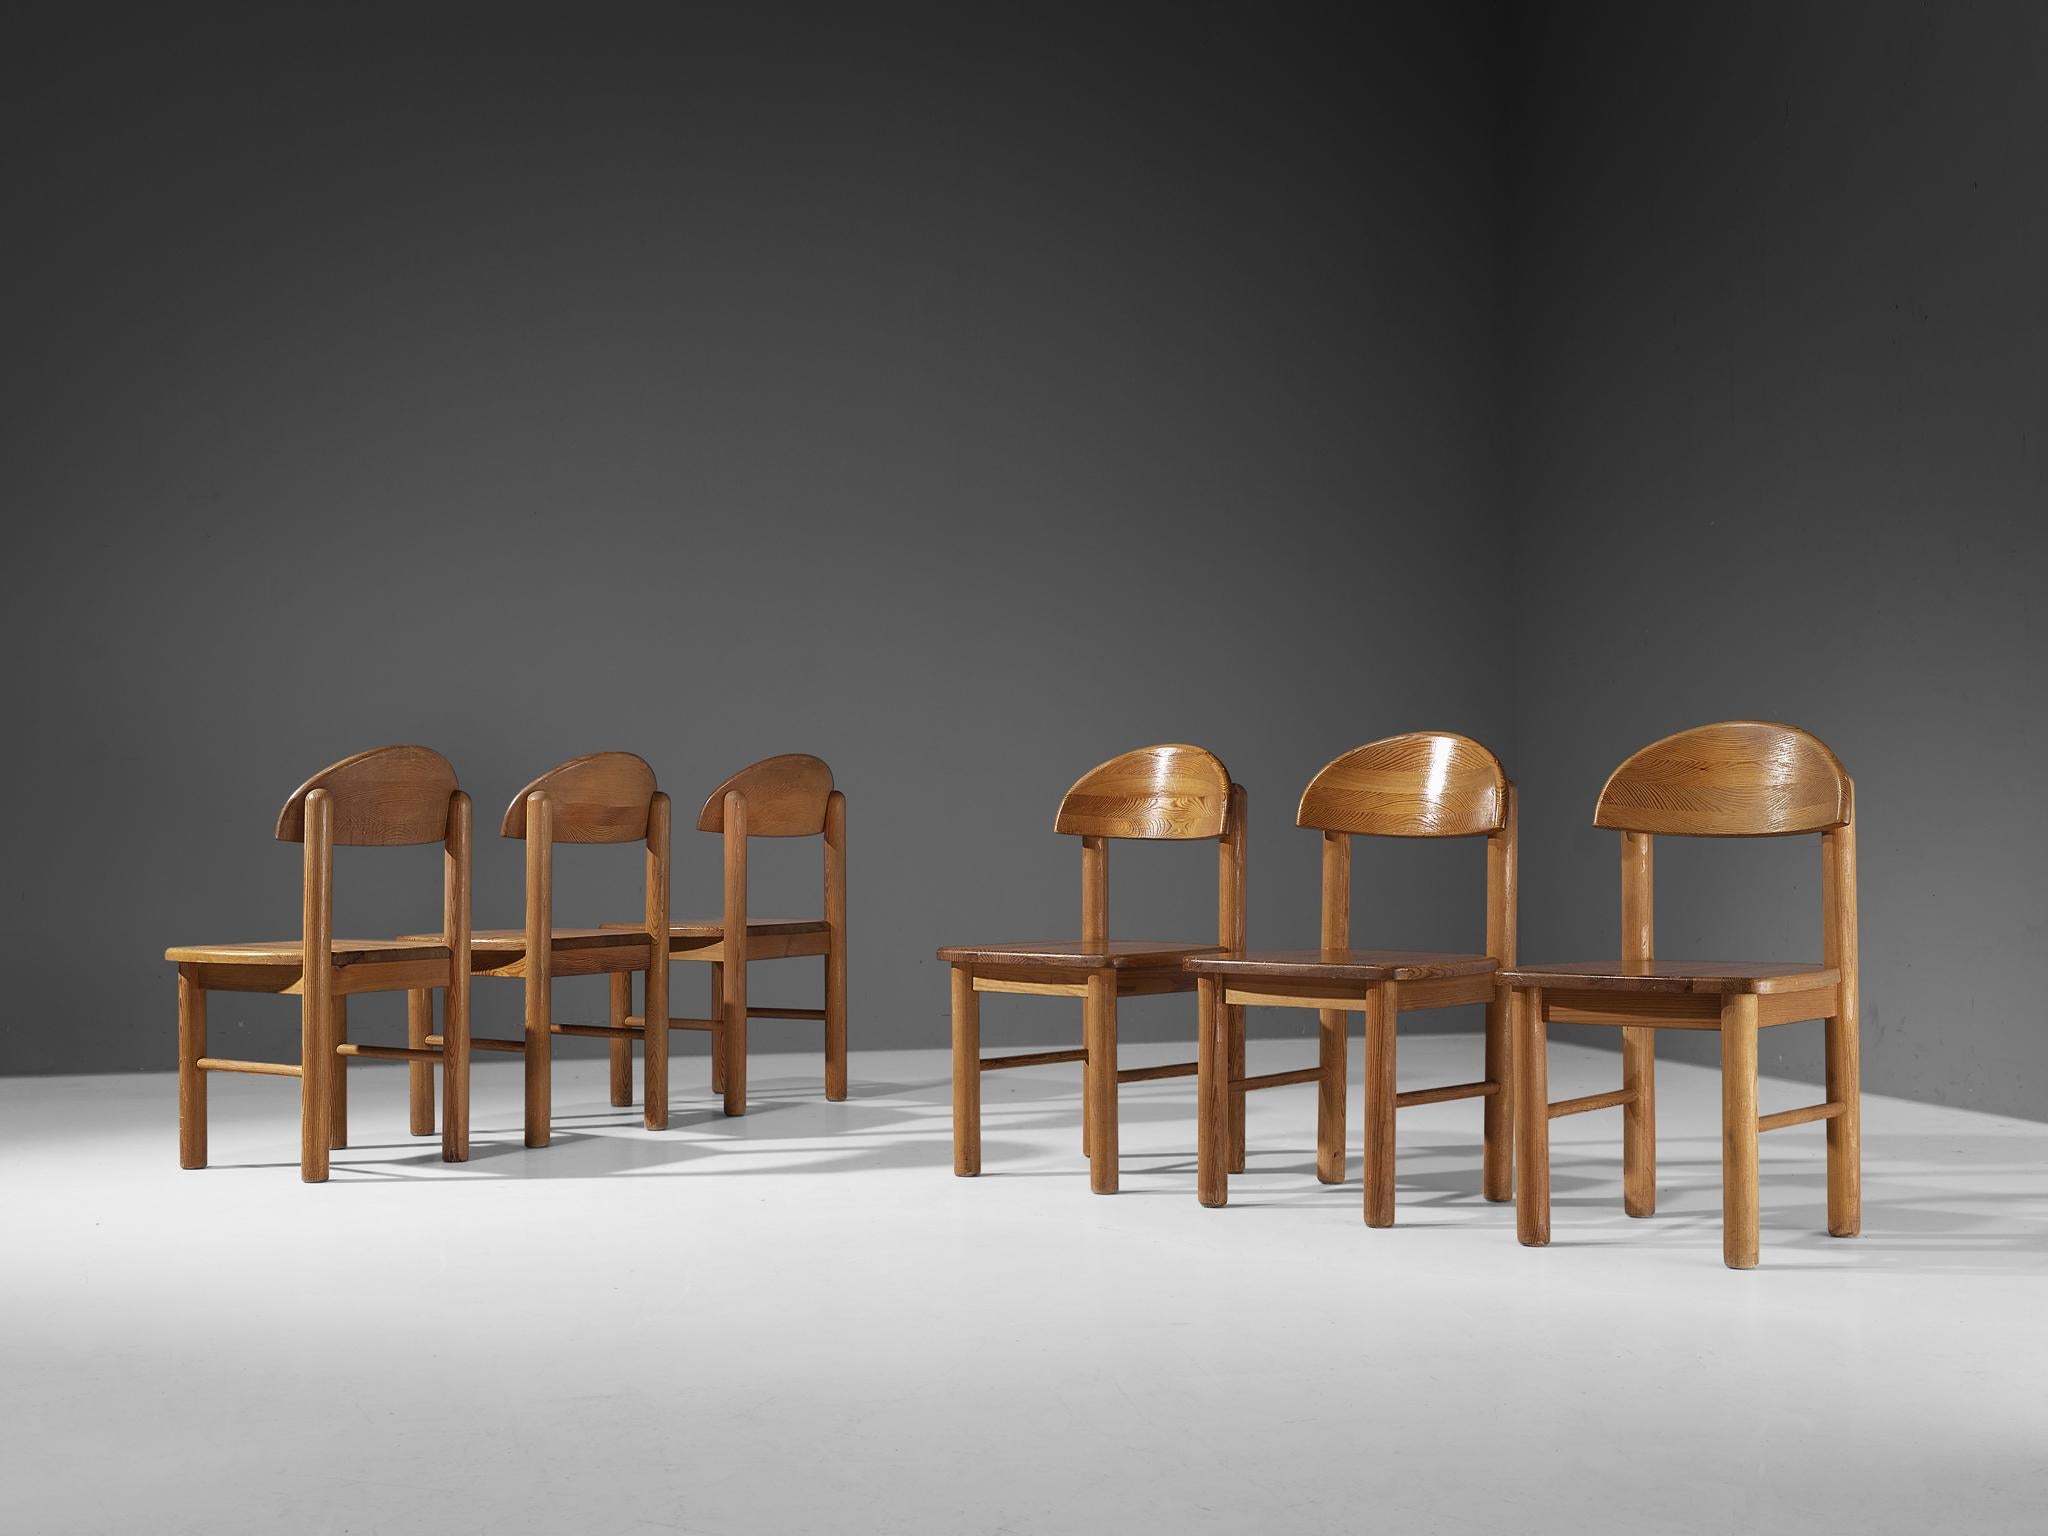 Rainer Daumiller for Hirtshals Savvaerk, set of six dining chairs, pine, Denmark, 1970s.

Beautiful set of organic and natural armchairs in solid pine. A simplistic design with a large seating and attention for the natural expression and grain of